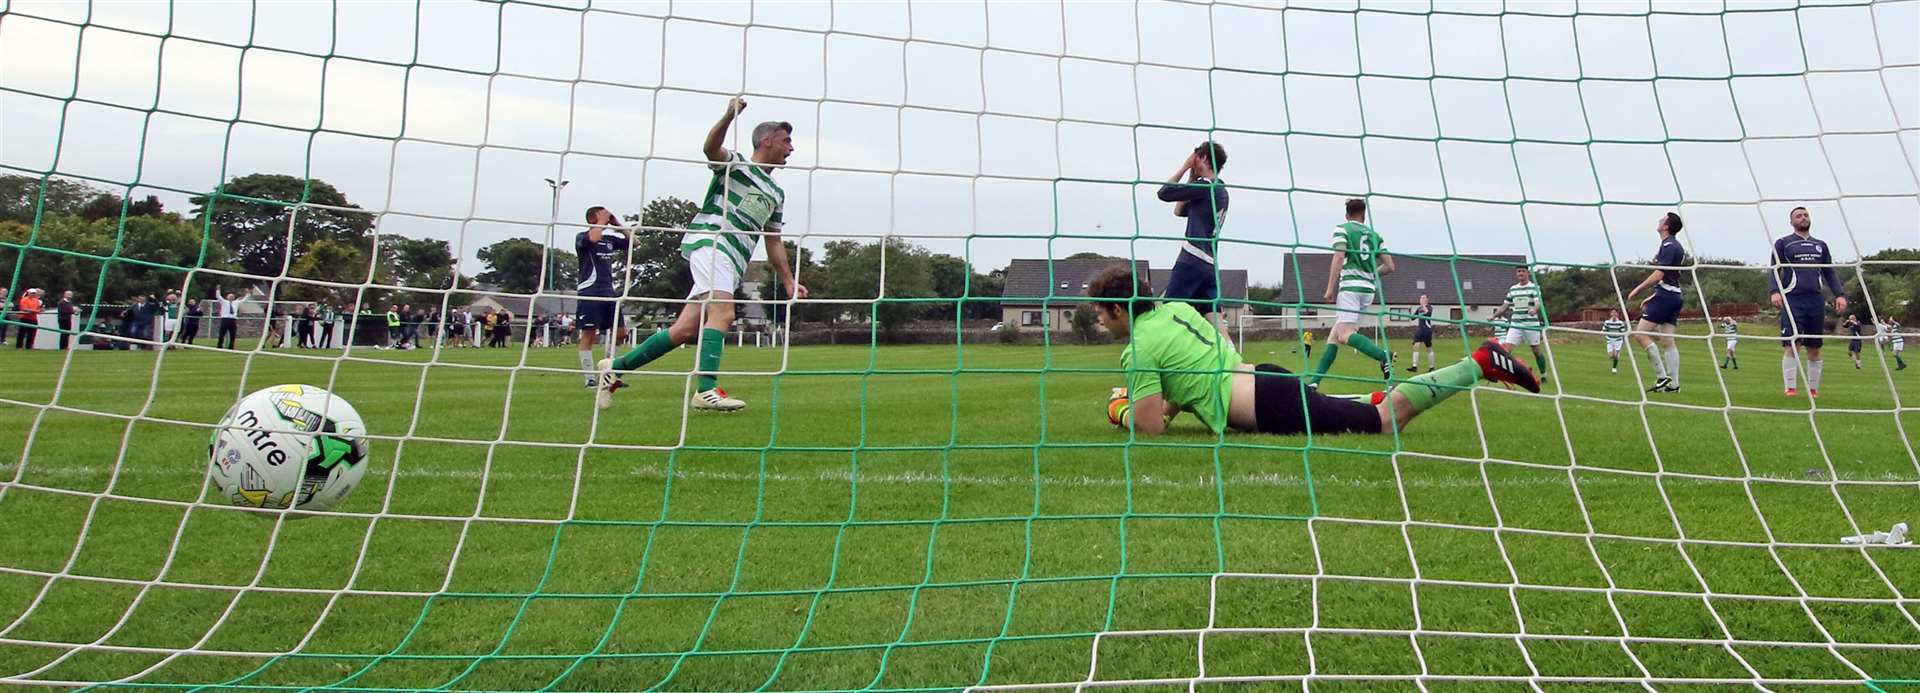 Castletown's Greg MacLeod hails Lochinver's misfortune as an own goal helps put the Back Park side through to the quarter-finals of the Highland Amateur Cup. Picture: James Gunn